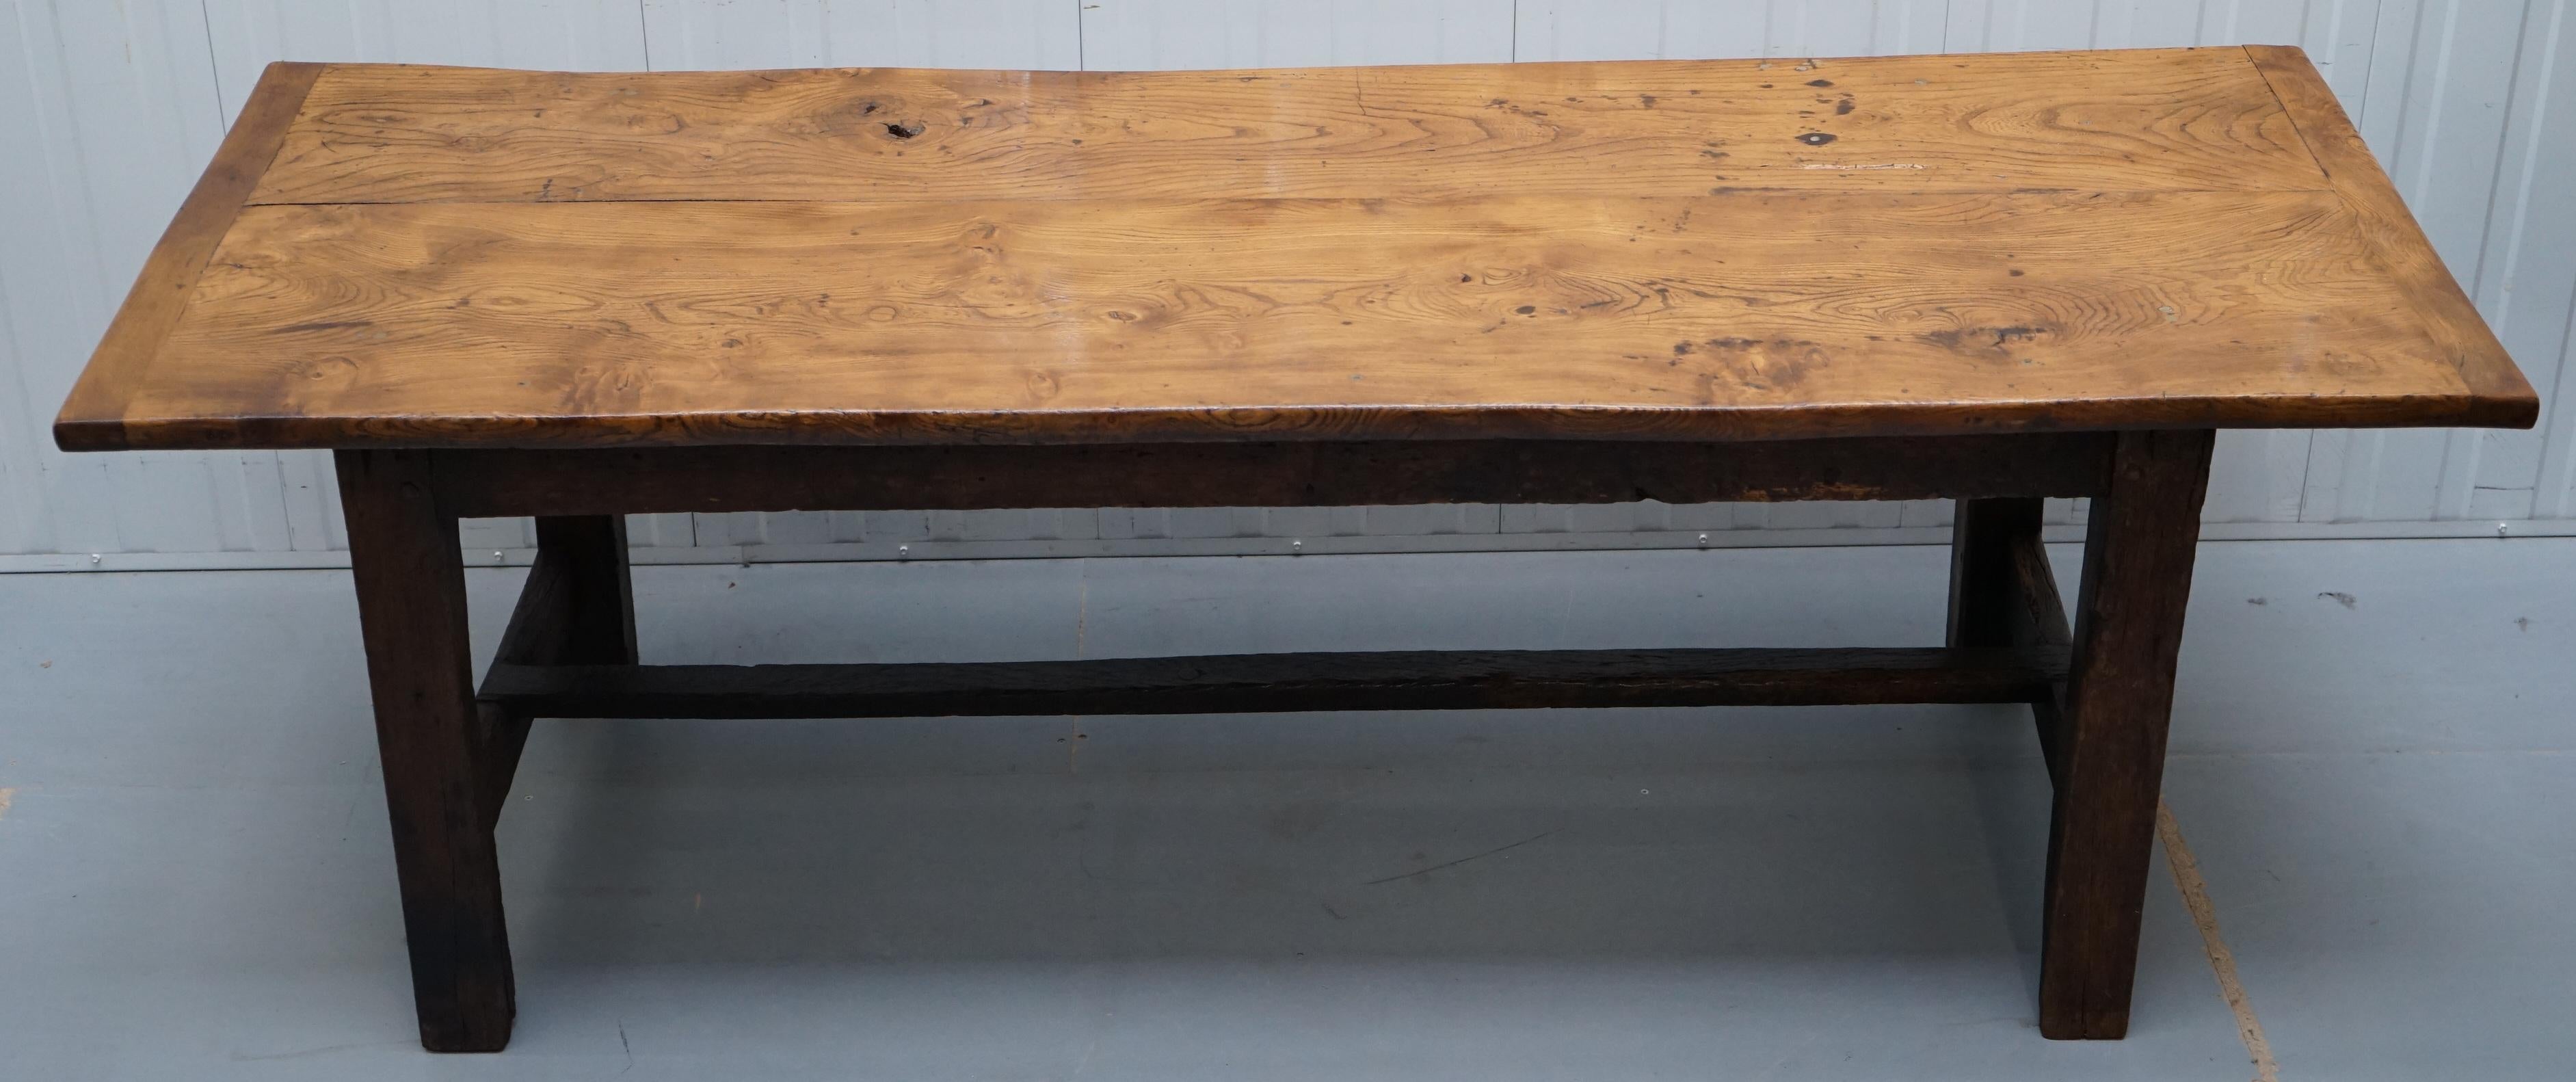 Georgian Stunning Rare 18th Century Solid Elm 2 Plank Top Refectory Dining Table Seats